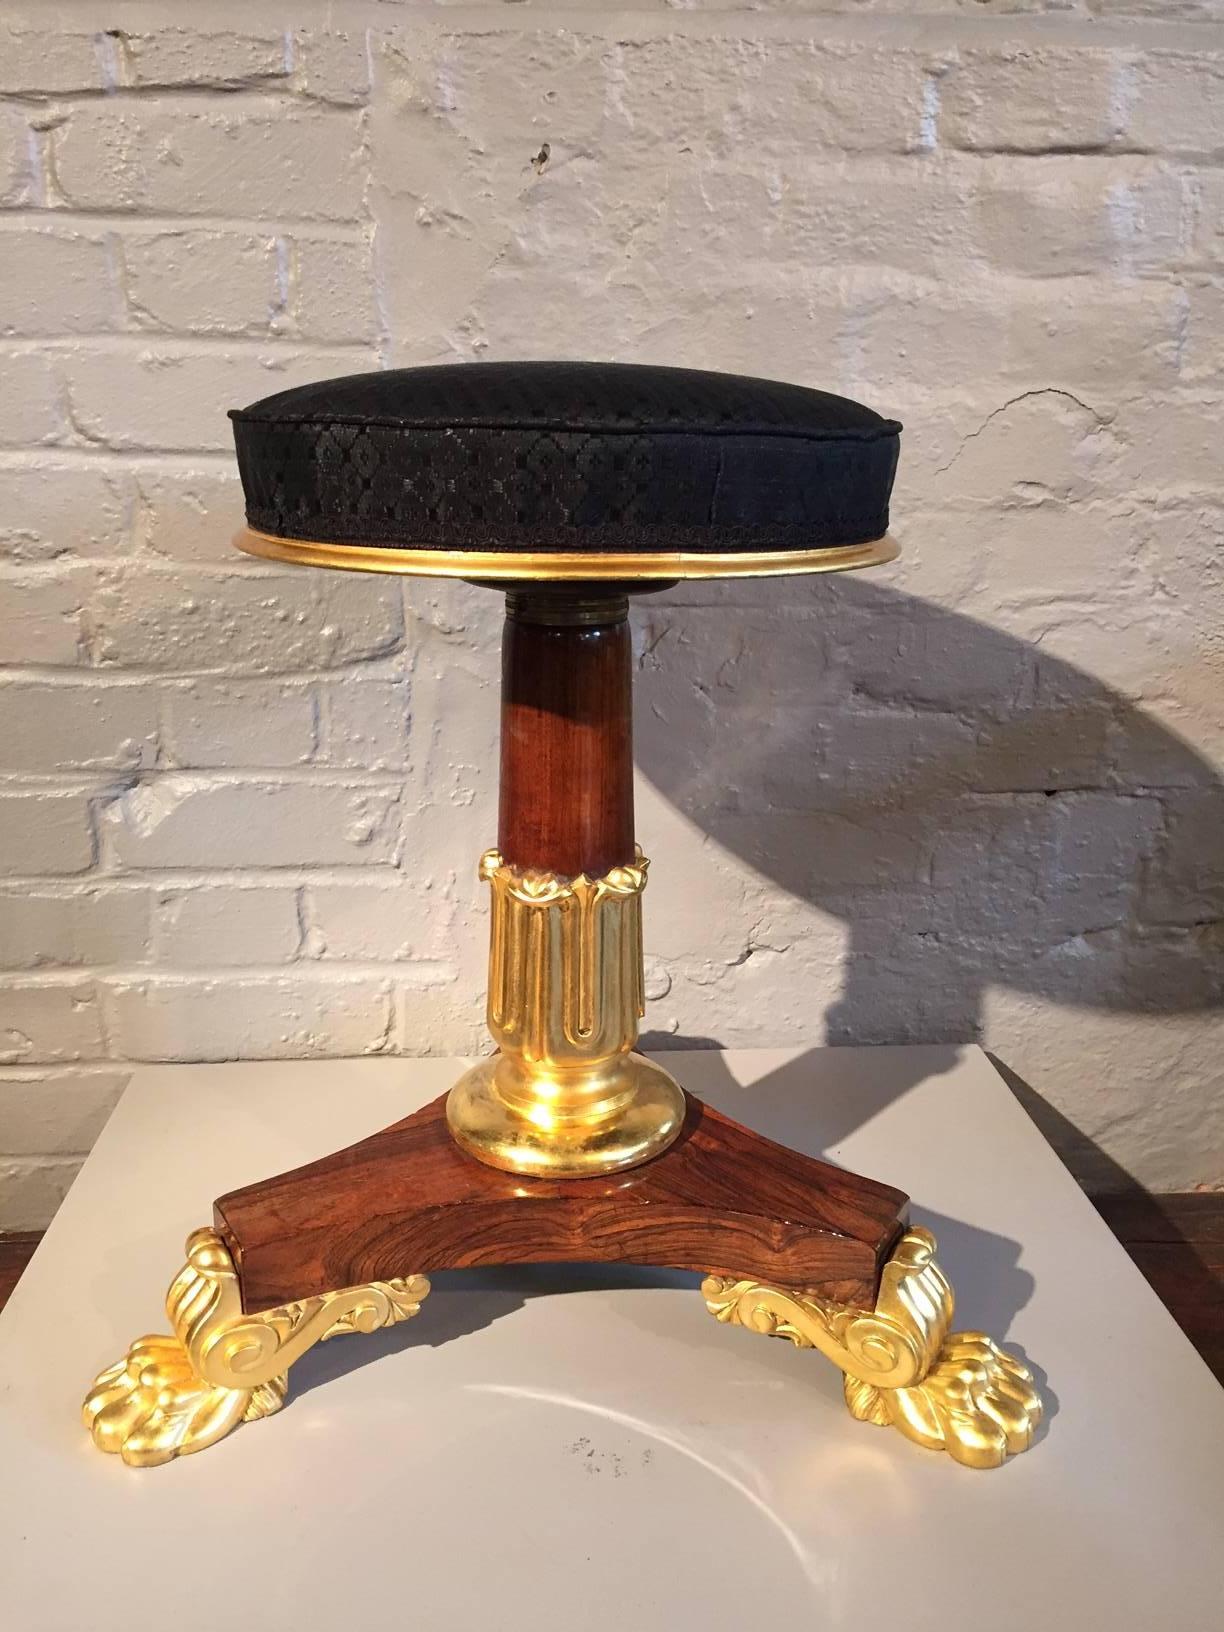 A fine and rare example of Regency furniture attributable to the designs and workshops of George Smith, 1786-1826.
A parcel-gilt adjustable piano music stool in rosewood.